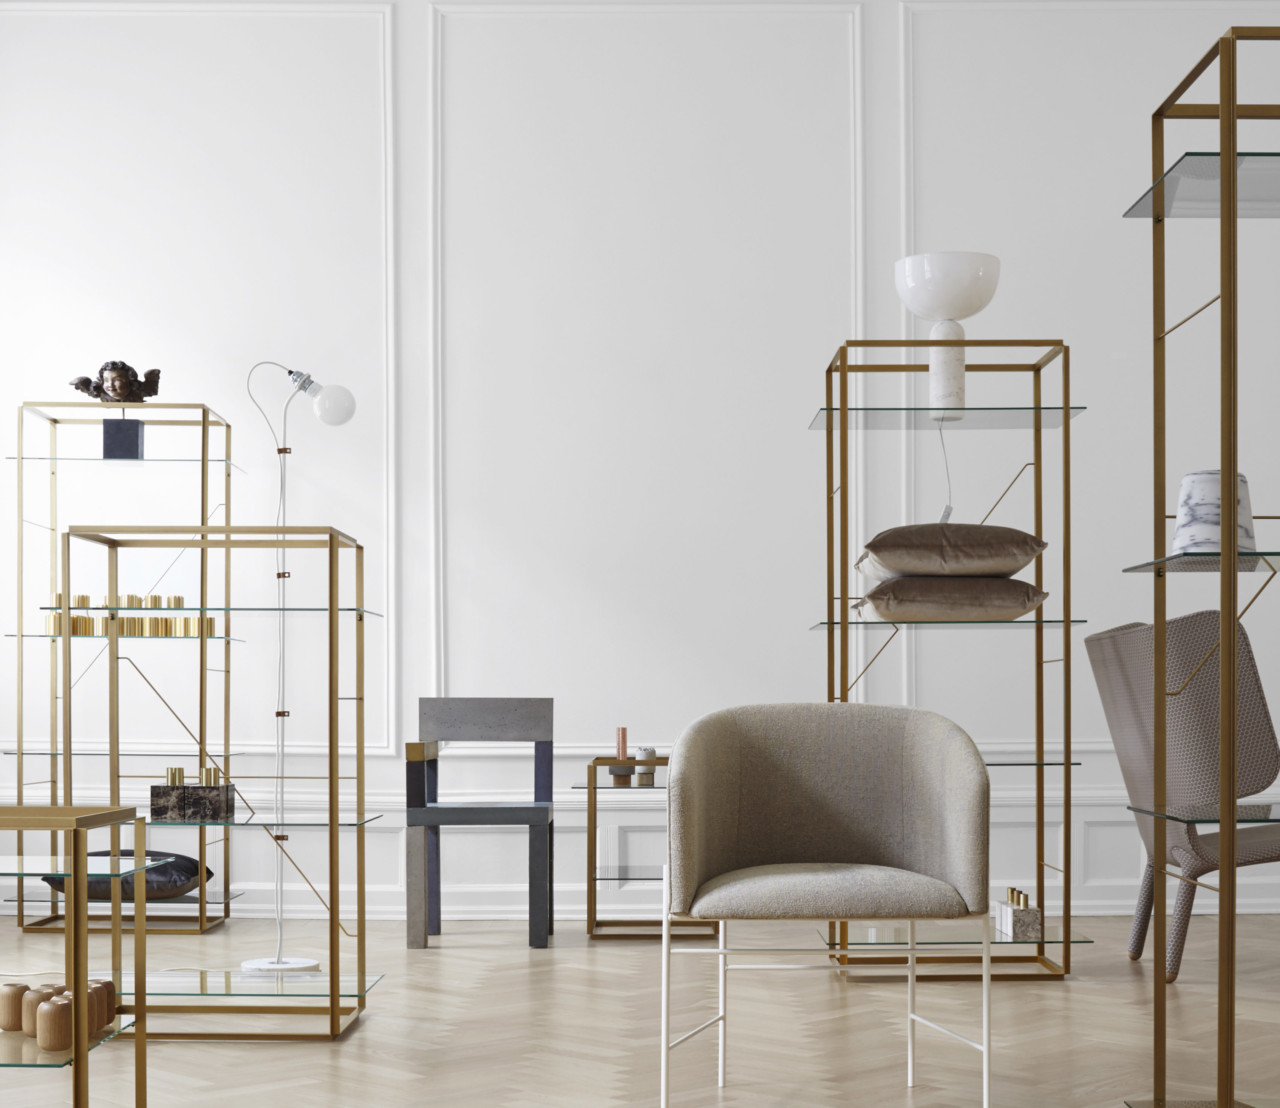 Functional Design x Sculptural Art: New Works’ Latest Collection